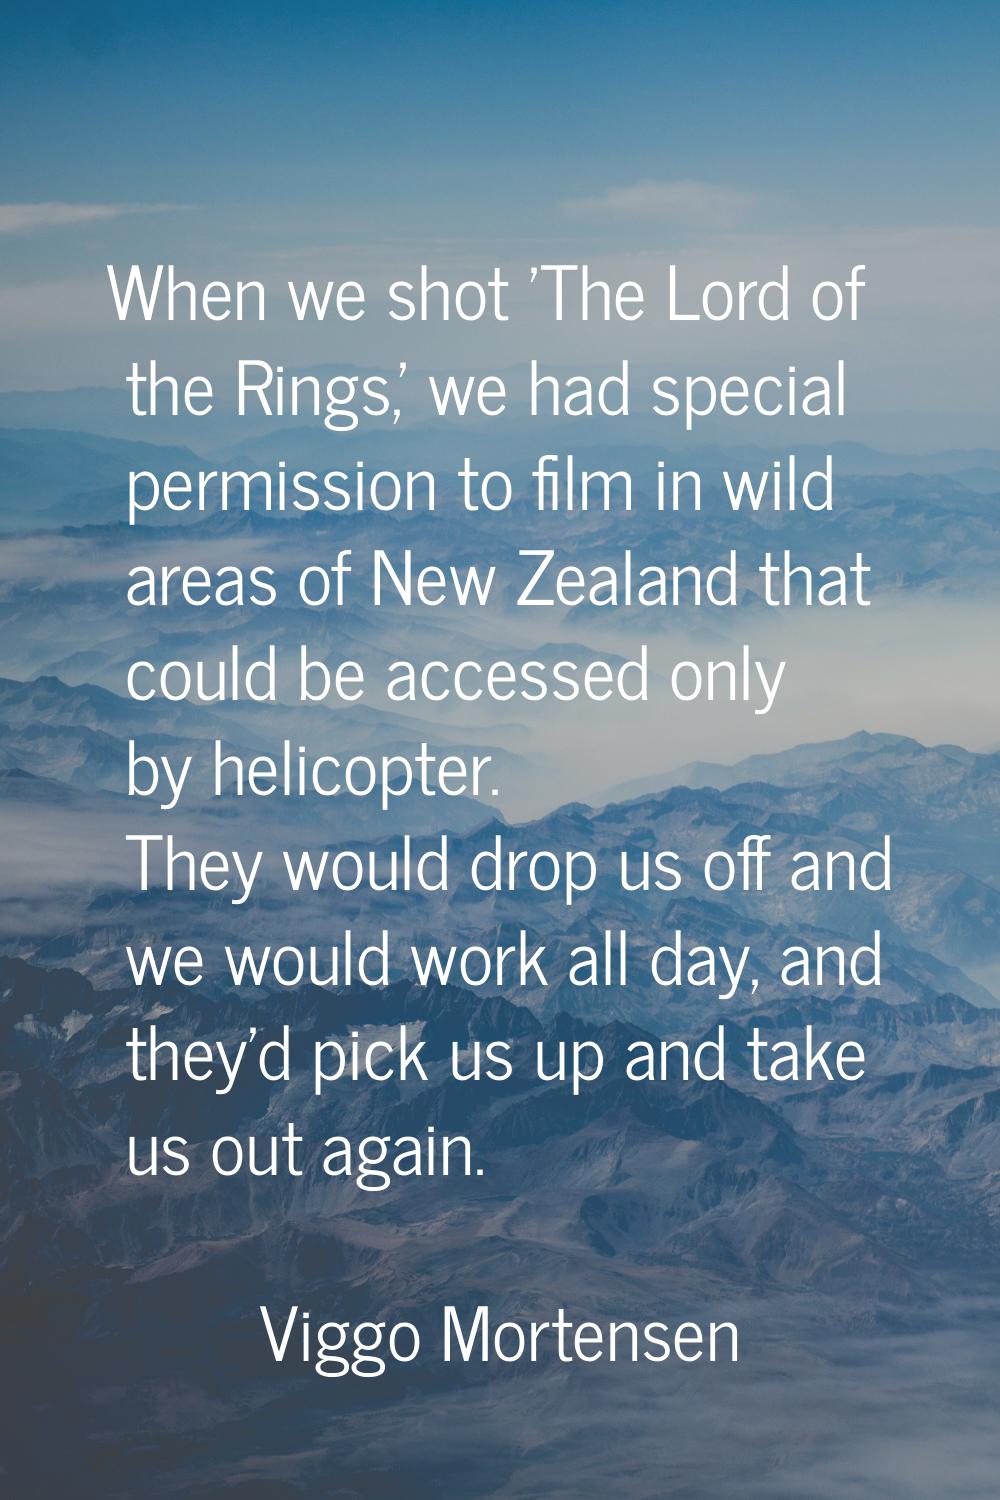 When we shot 'The Lord of the Rings,' we had special permission to film in wild areas of New Zealan